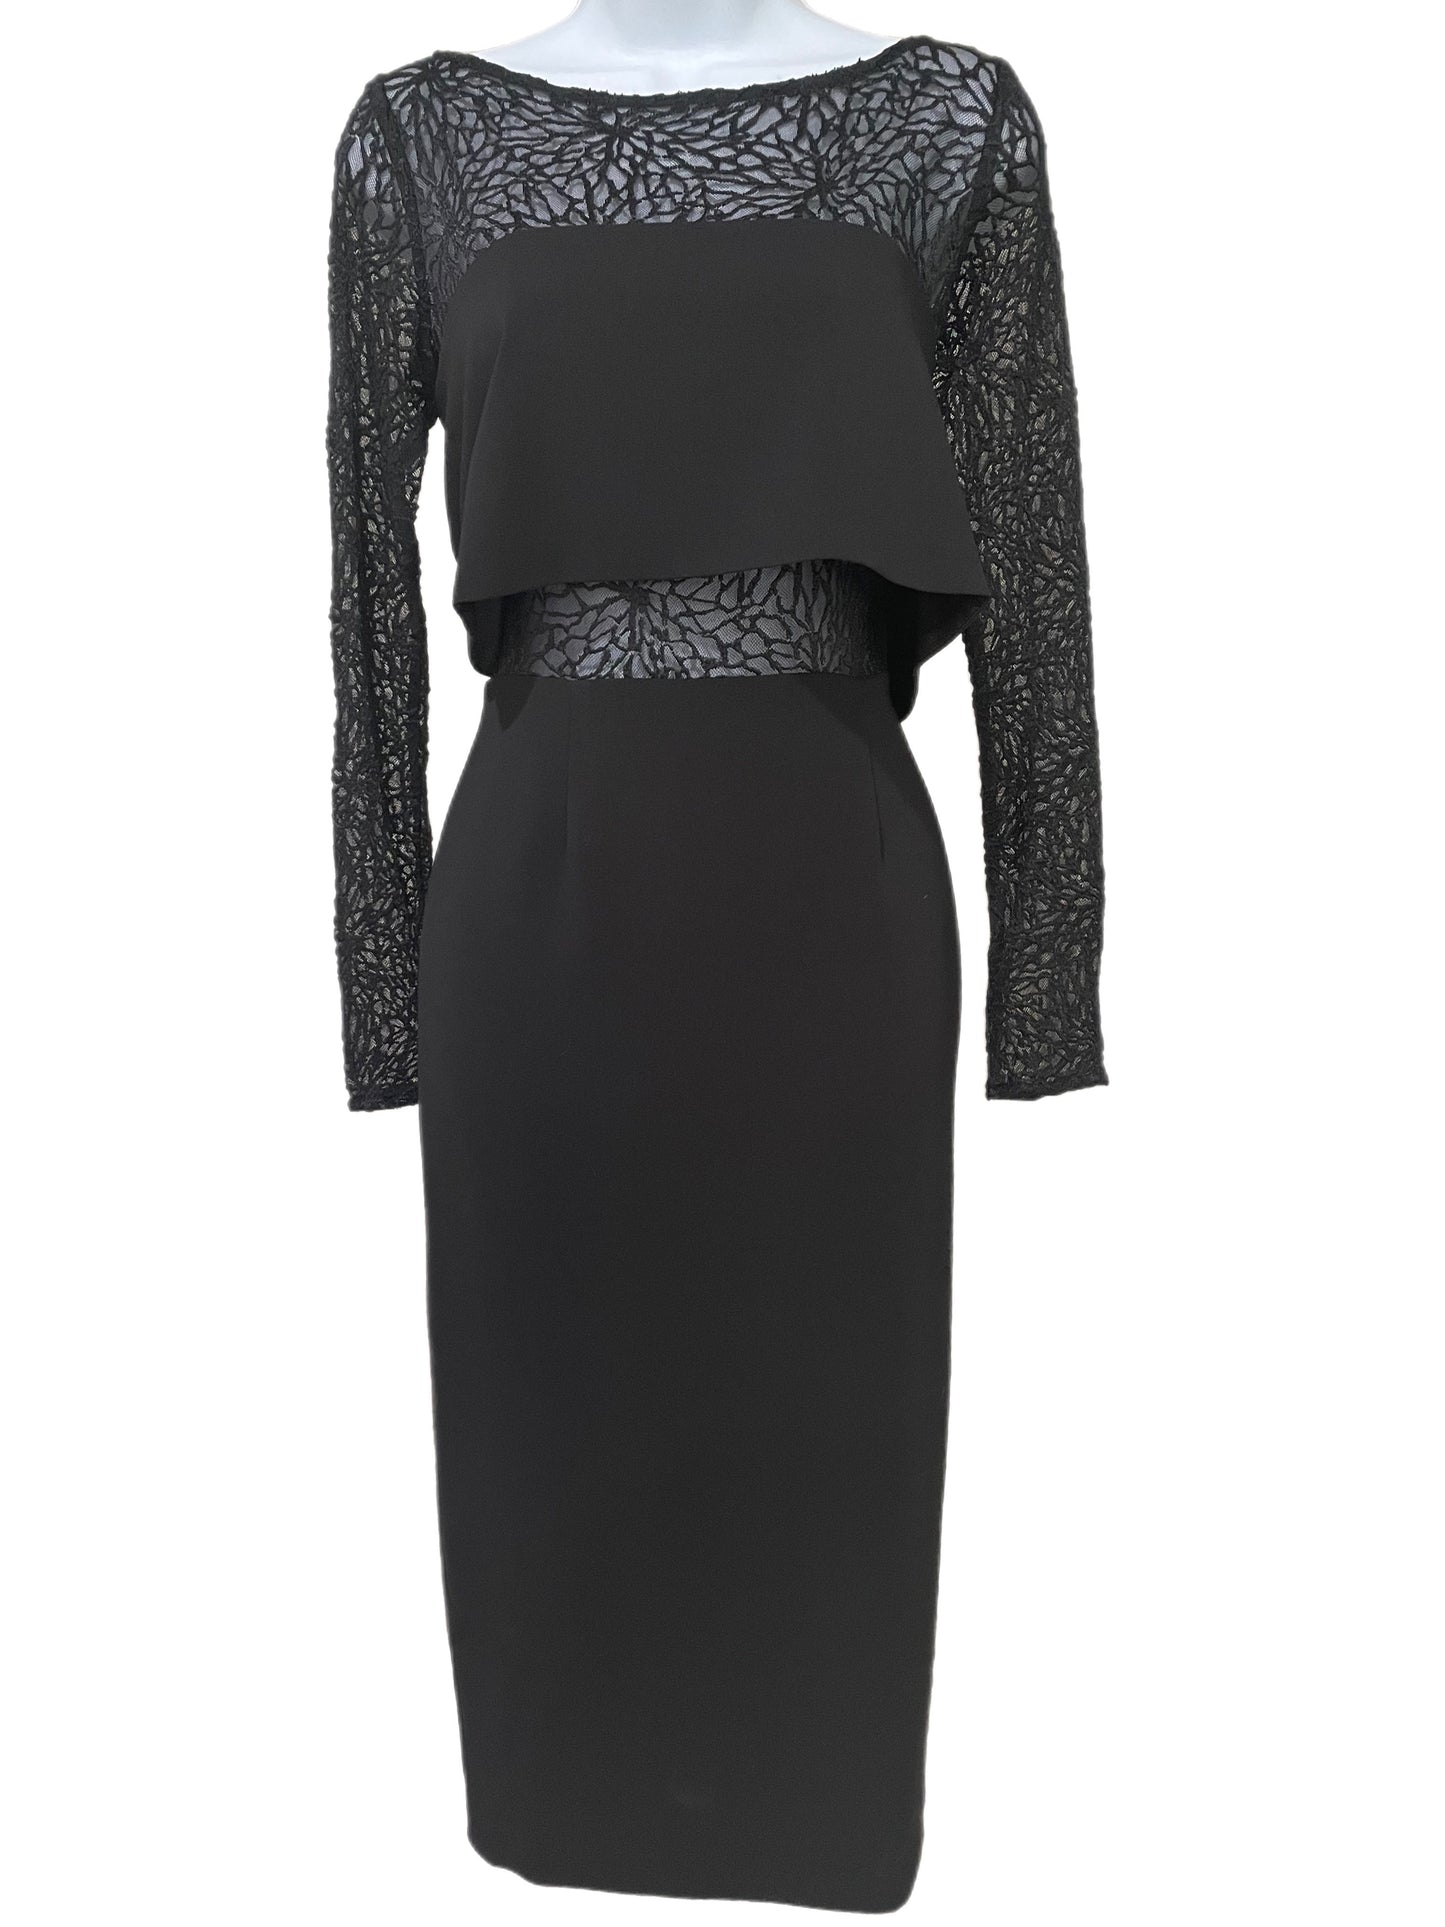 Dress-Black Long-Laced Sleeve w/ Crop Top Illusion By Jay Goodfrey